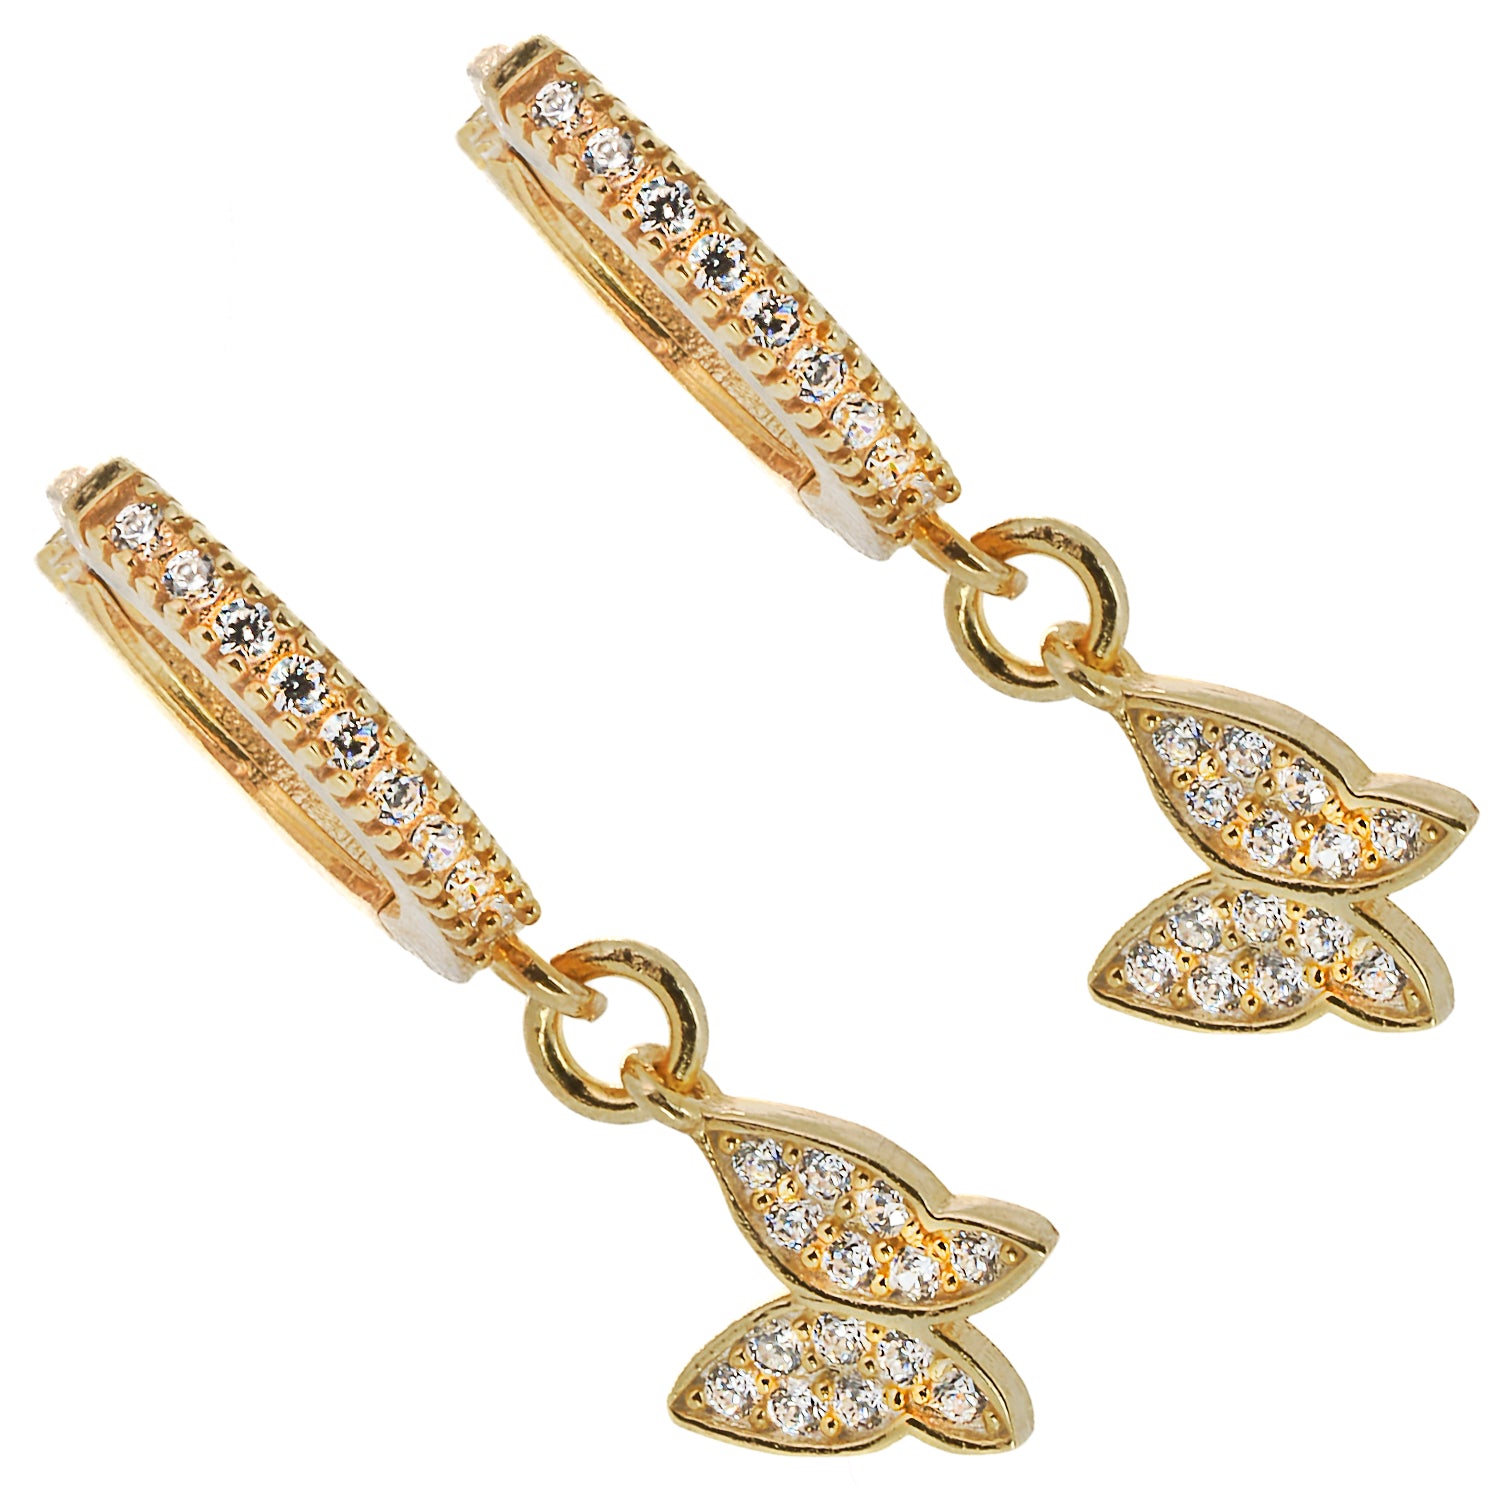 Dazzling Gold Sparkly Butterfly Earrings crafted with meticulous attention to detail